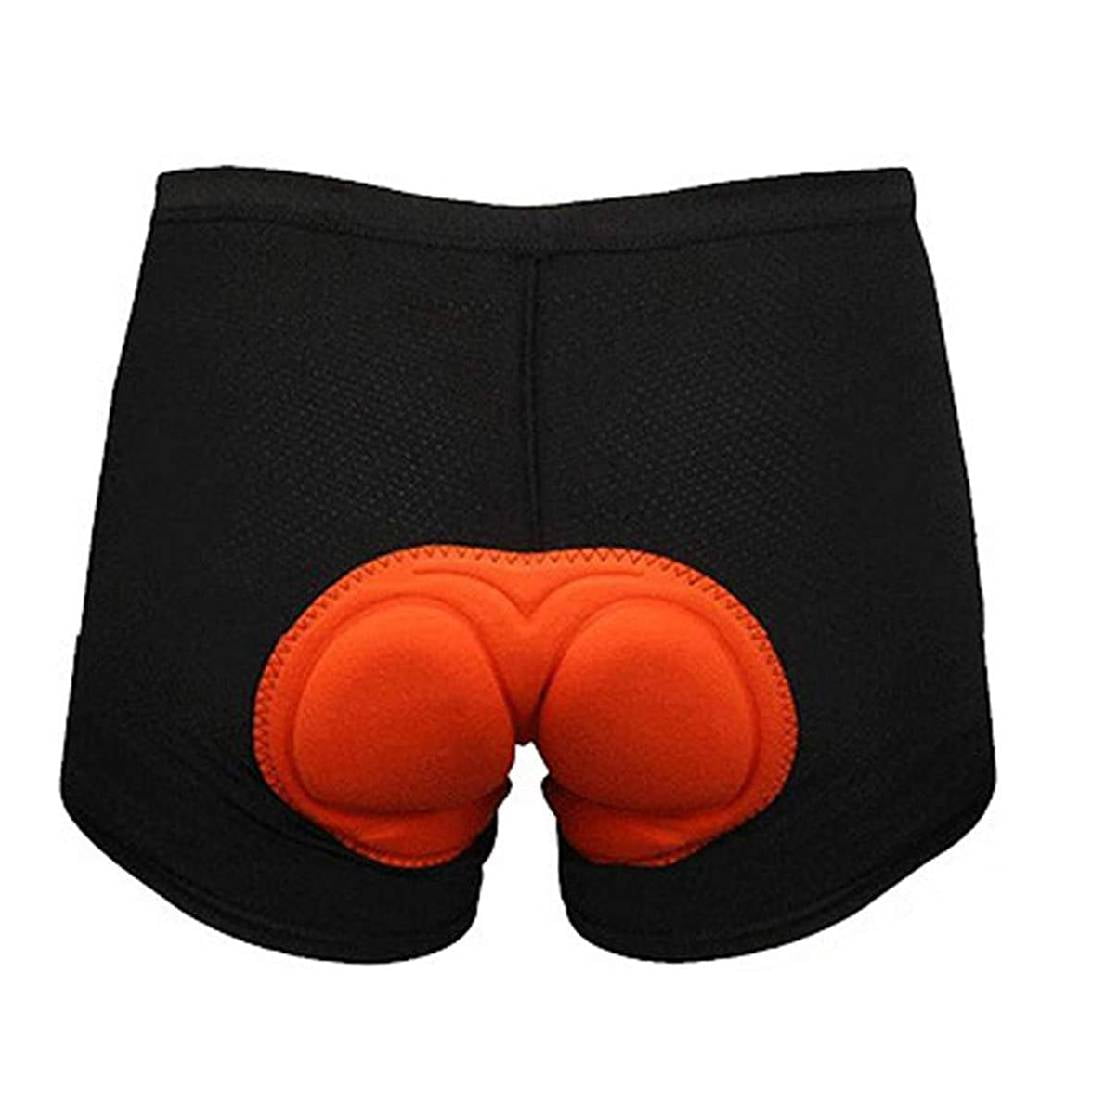 S-3XL Men's Cycling Shorts Bicycle Bike Underwear Pants With 3D Gel Pad Black